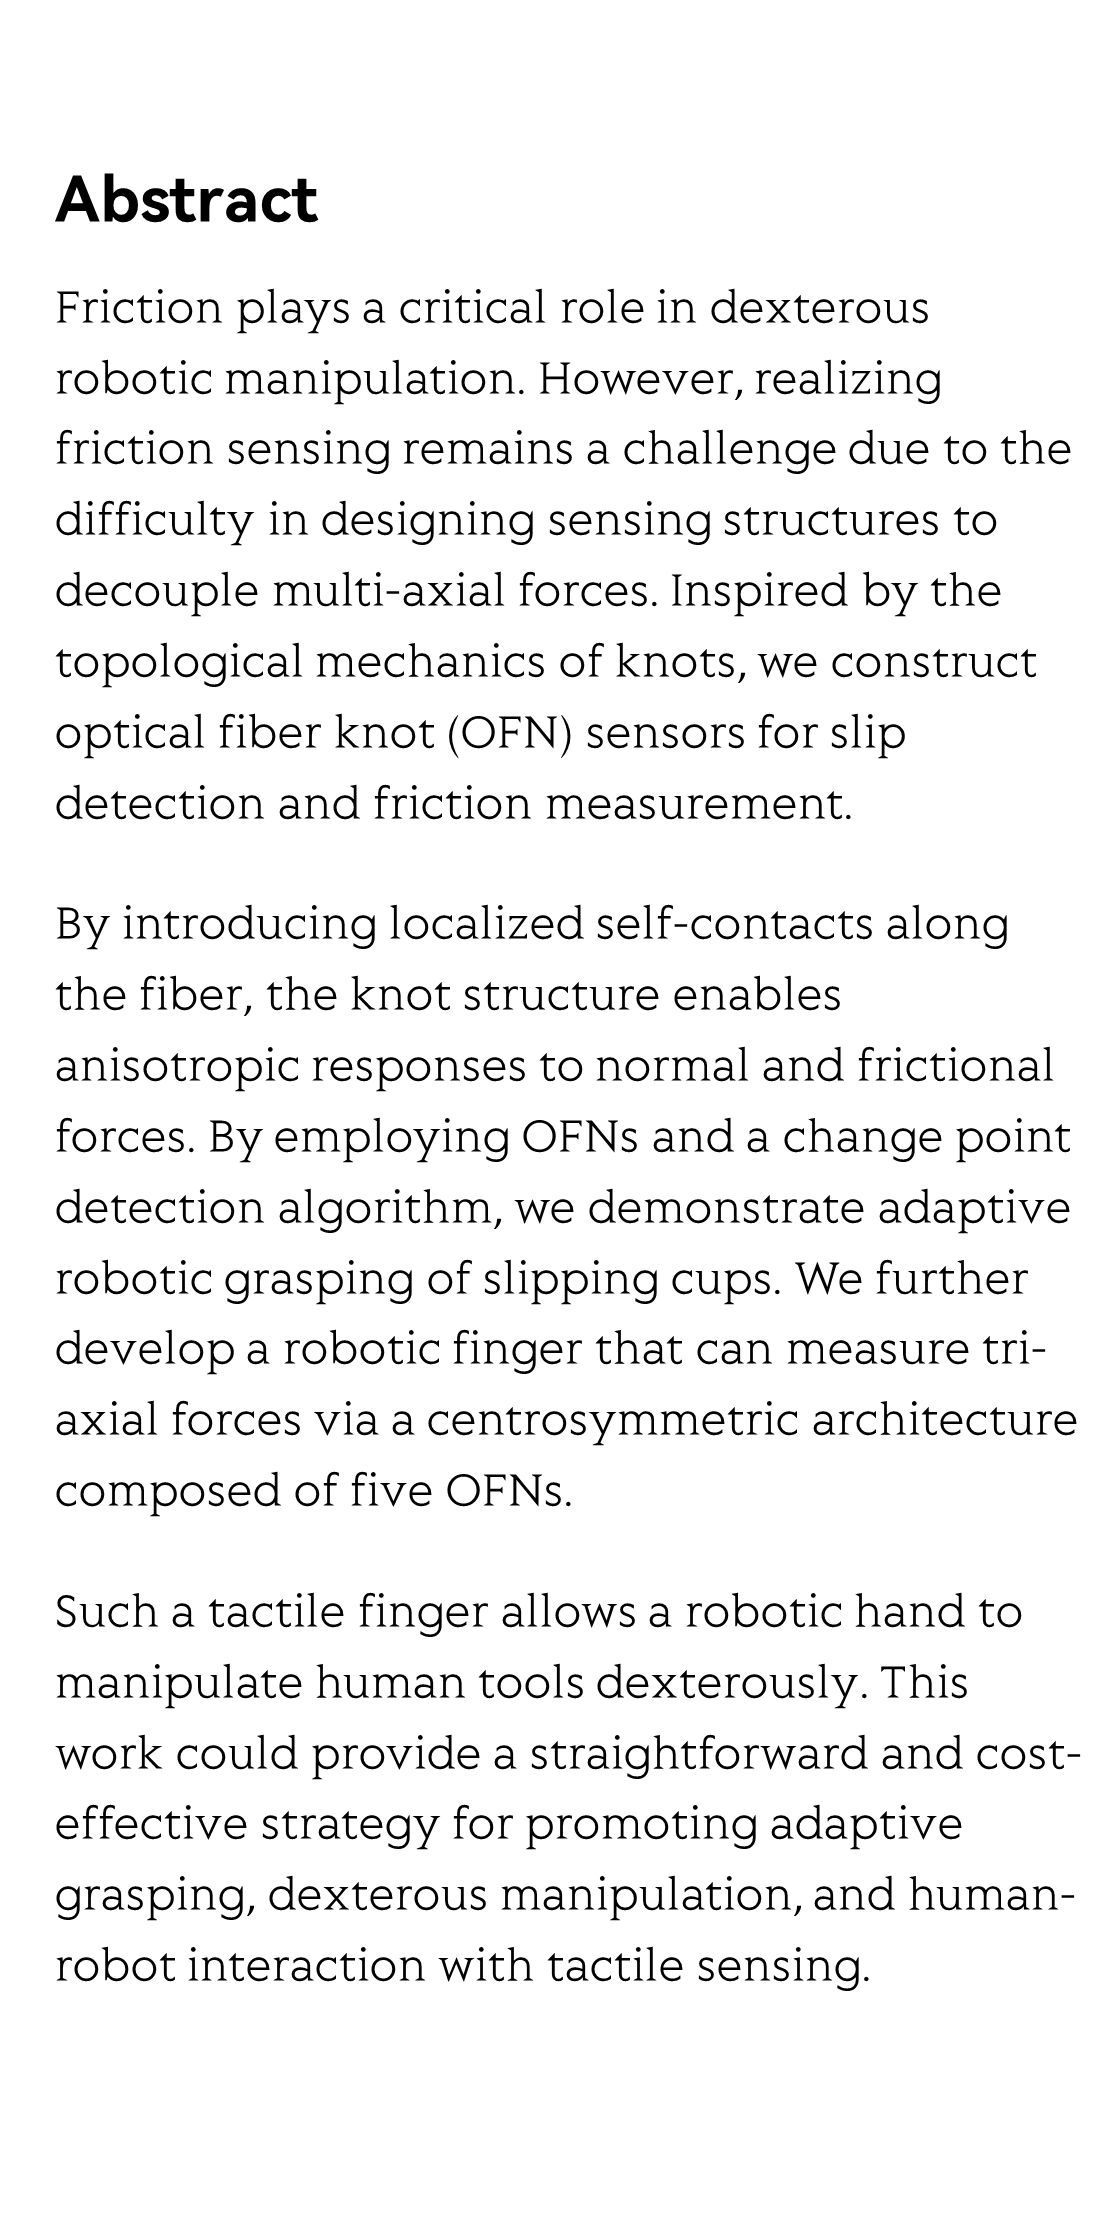 Knot-inspired optical sensors for slip detection and friction measurement in dexterous robotic manipulation_2